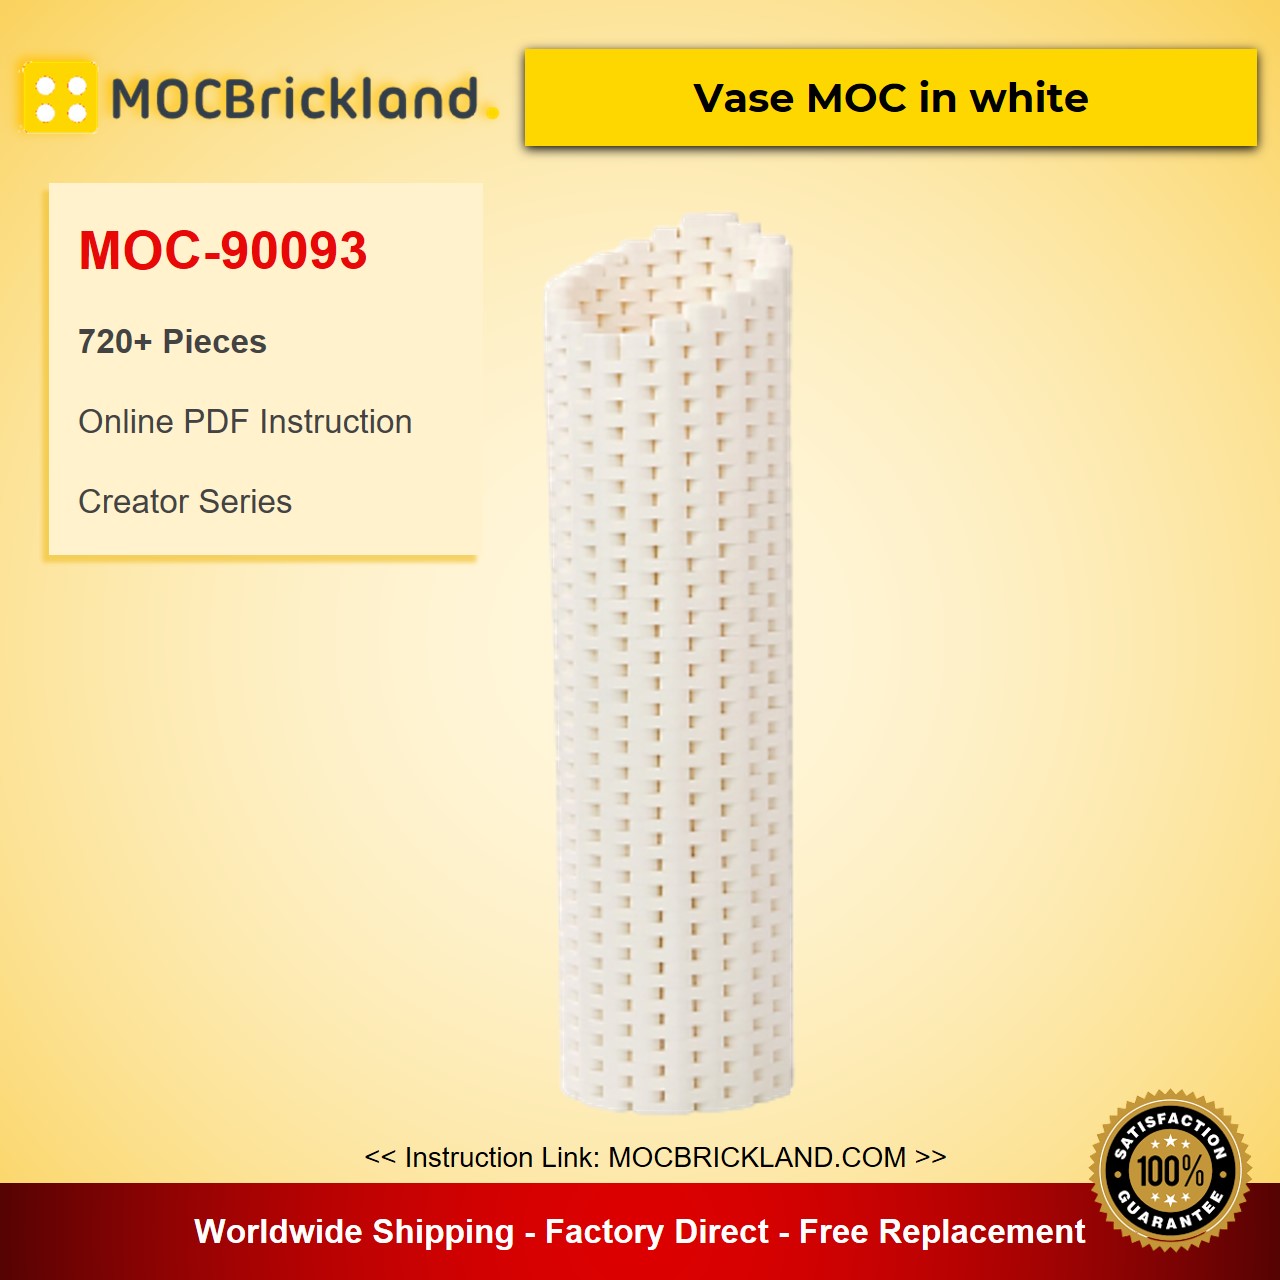 Vase MOC in white Compatible with LEGO Flower Bouquet #10280, #40461, and 40460 MOC-90093 Creator With 720 Pieces